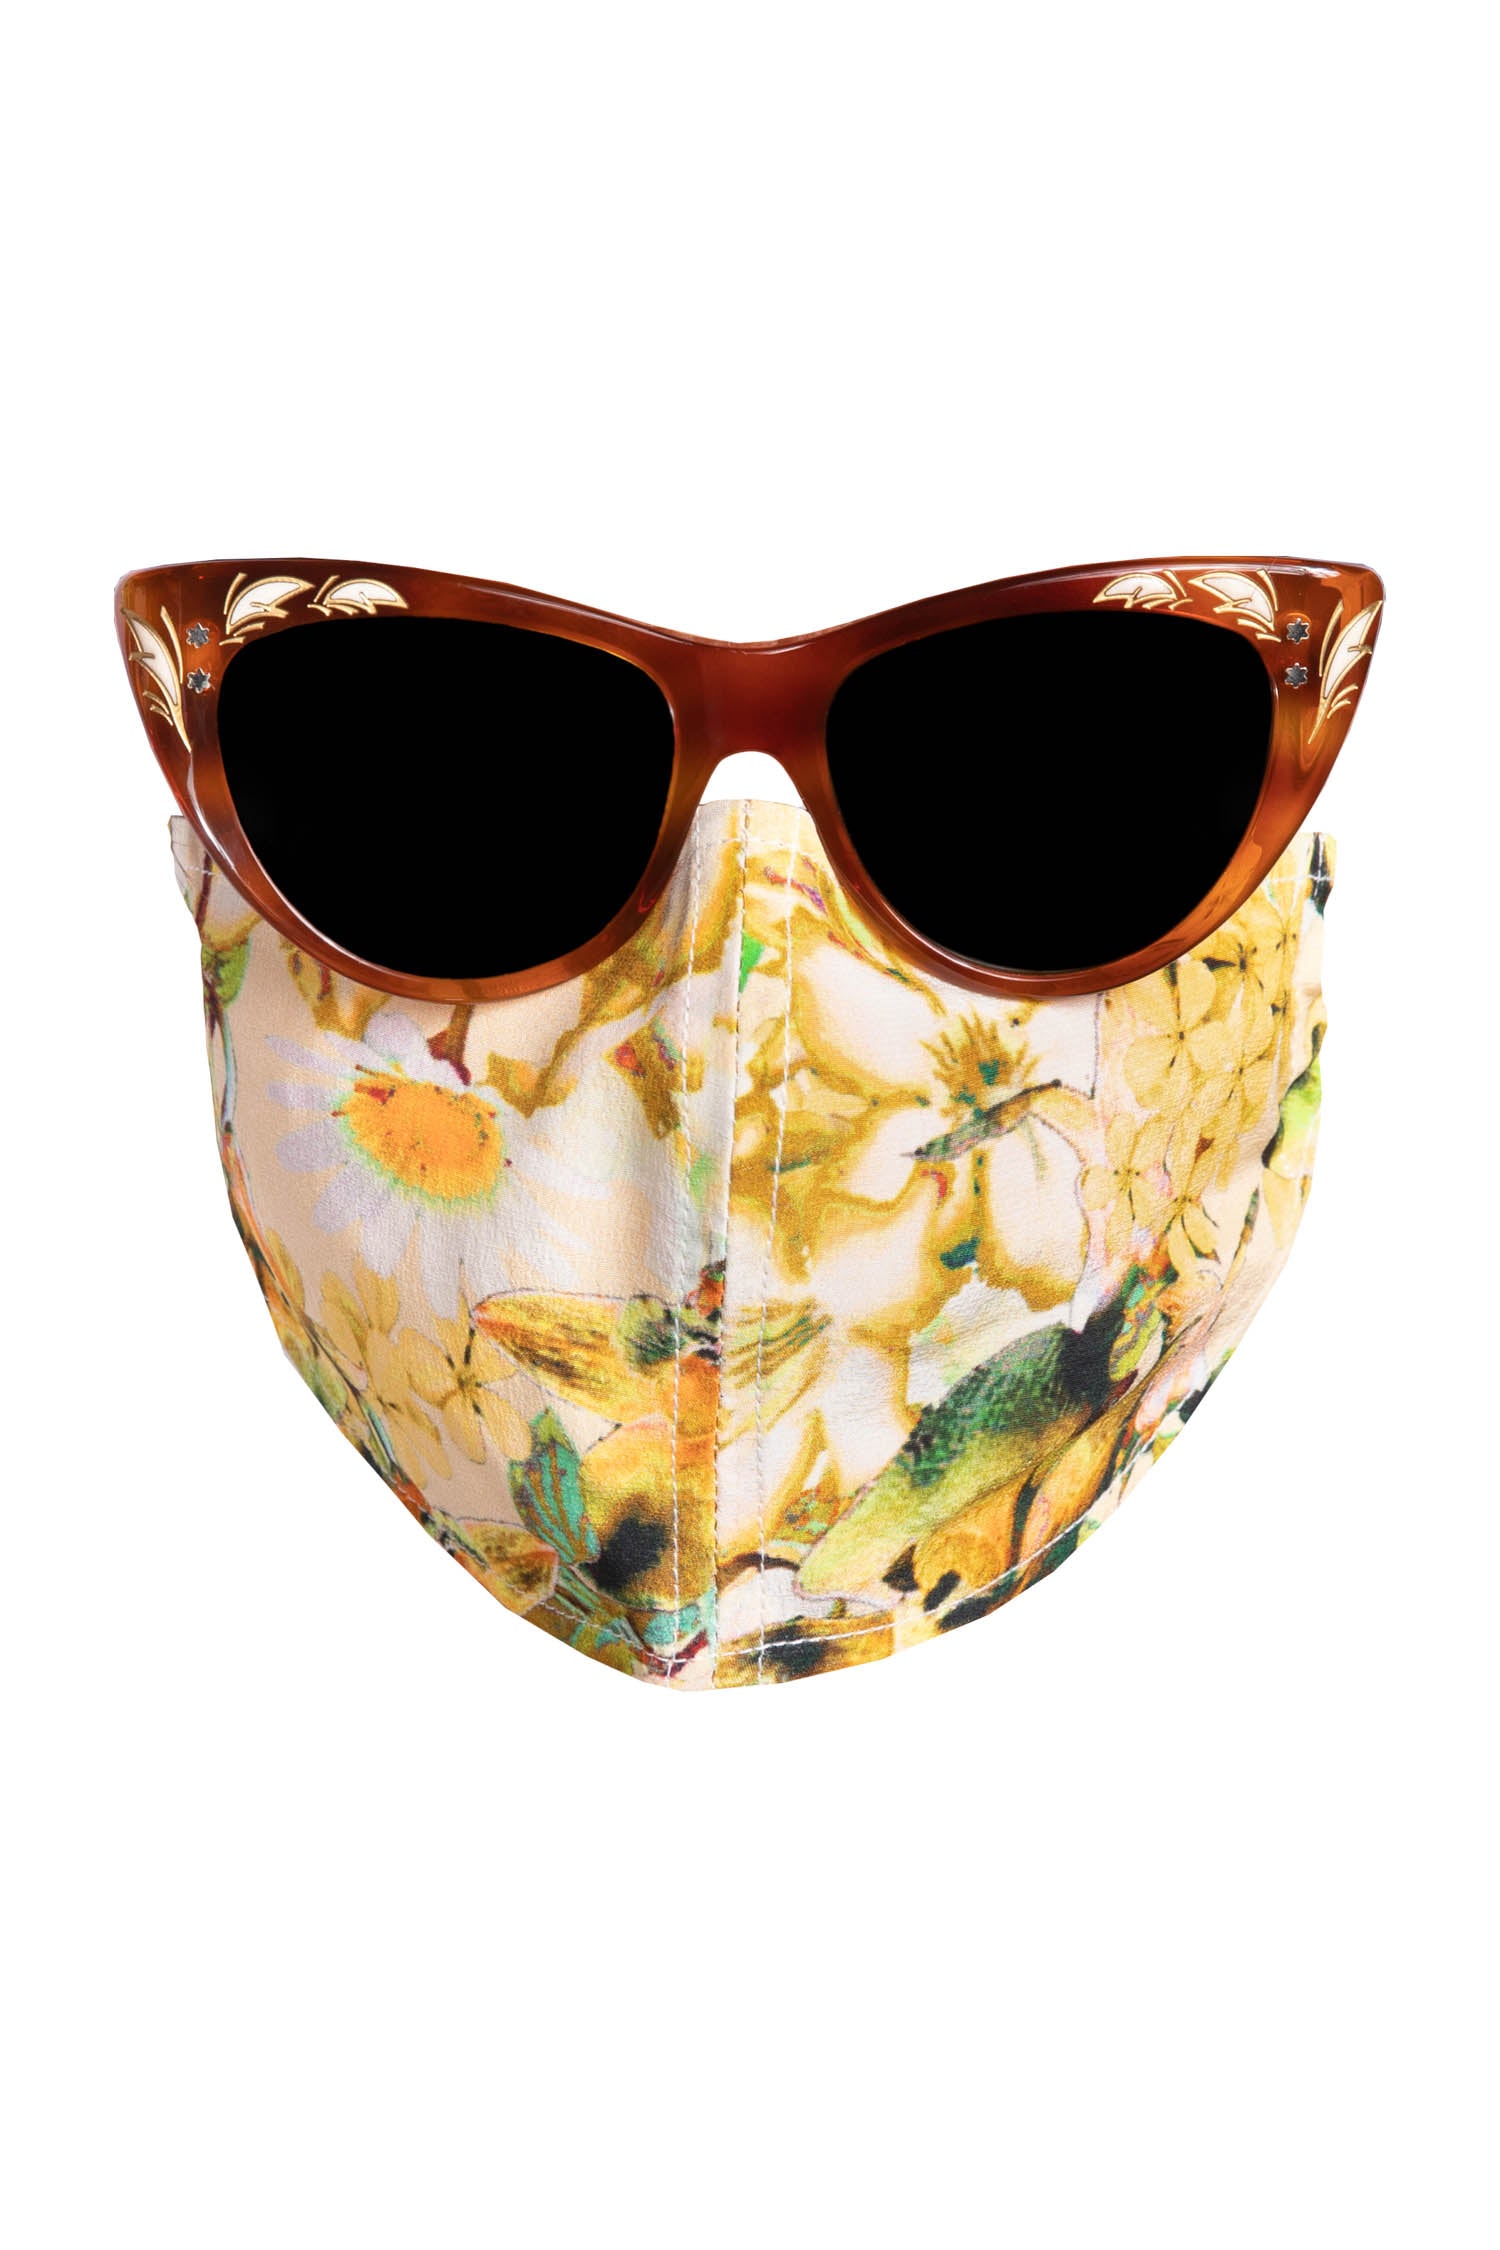 Silk Face Mask - Yellow Orchid